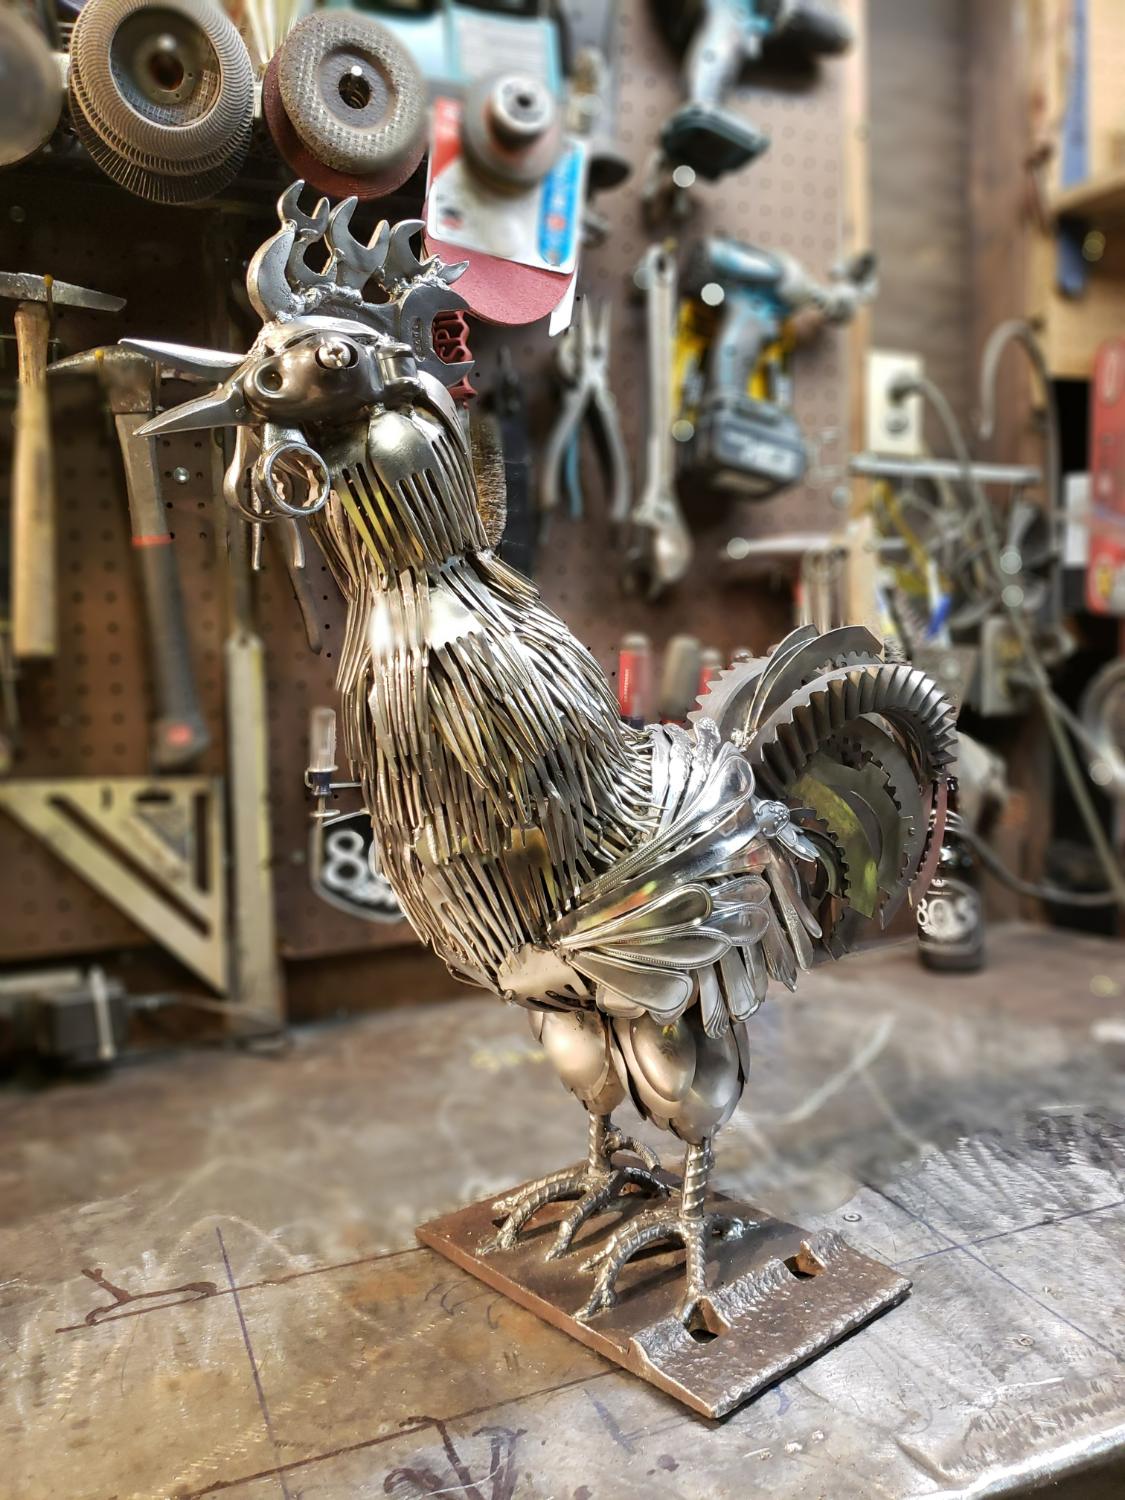 Weld art by metal artist PJ Kennedy aka PFe works, scrap metal rooster sculpture made of spoons, forks, and wrenches welded together